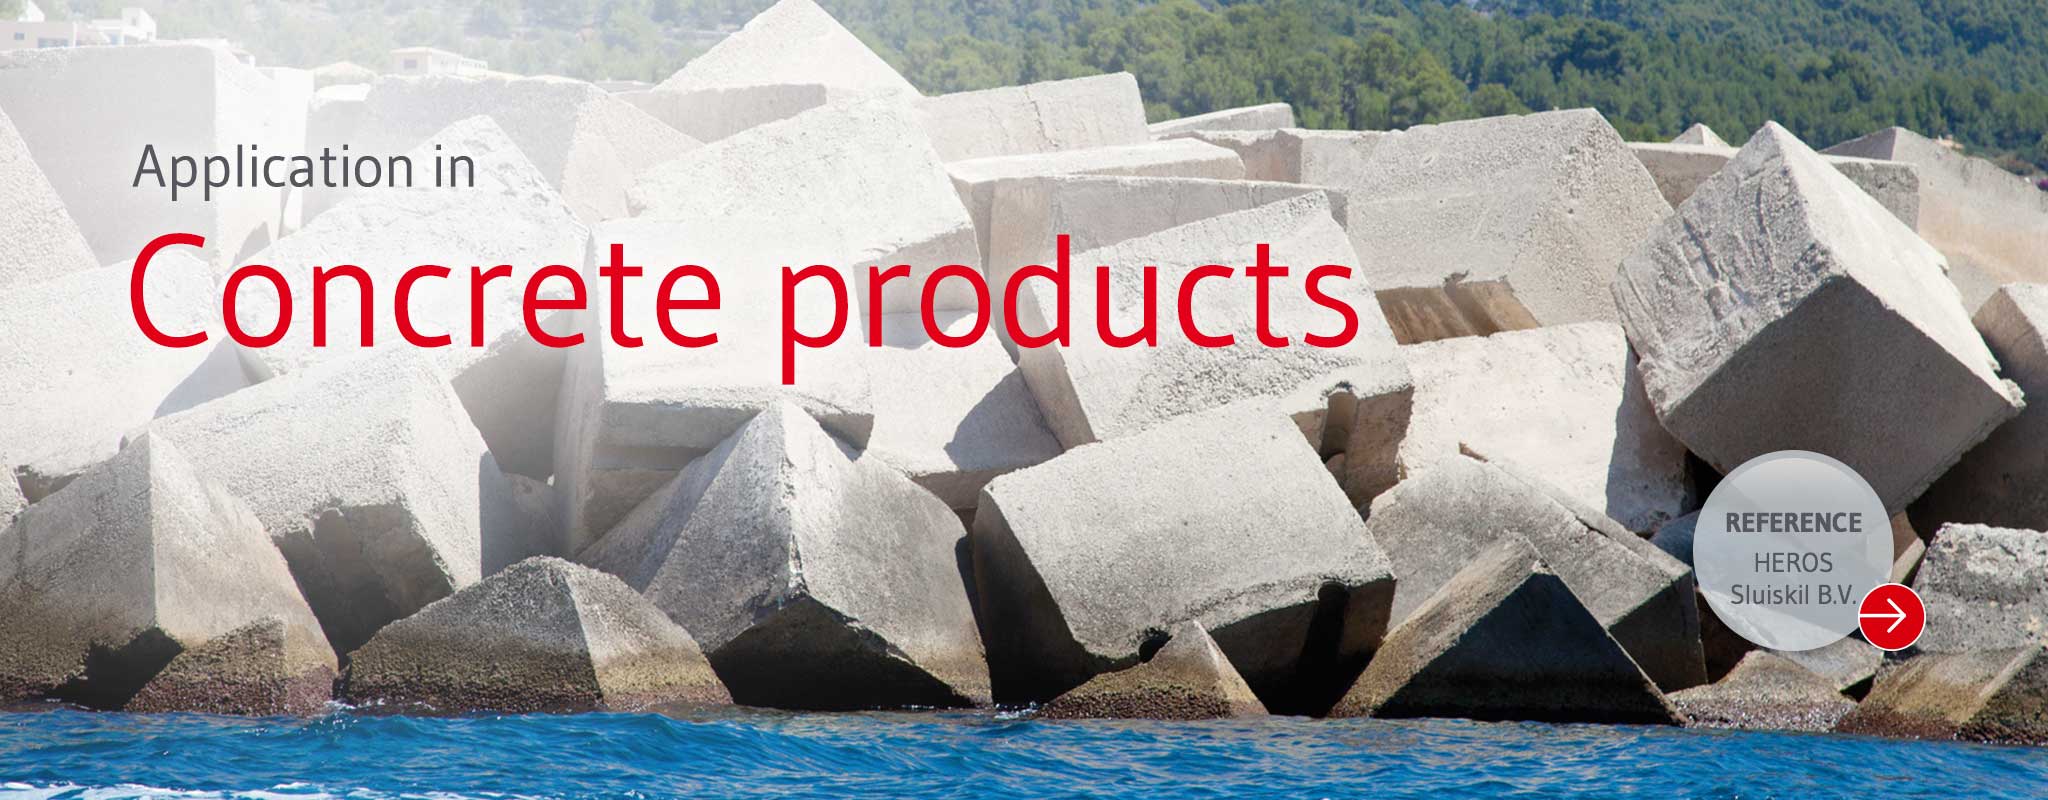 Use of secondary aggregates IBA in concrete products in the Netherlands